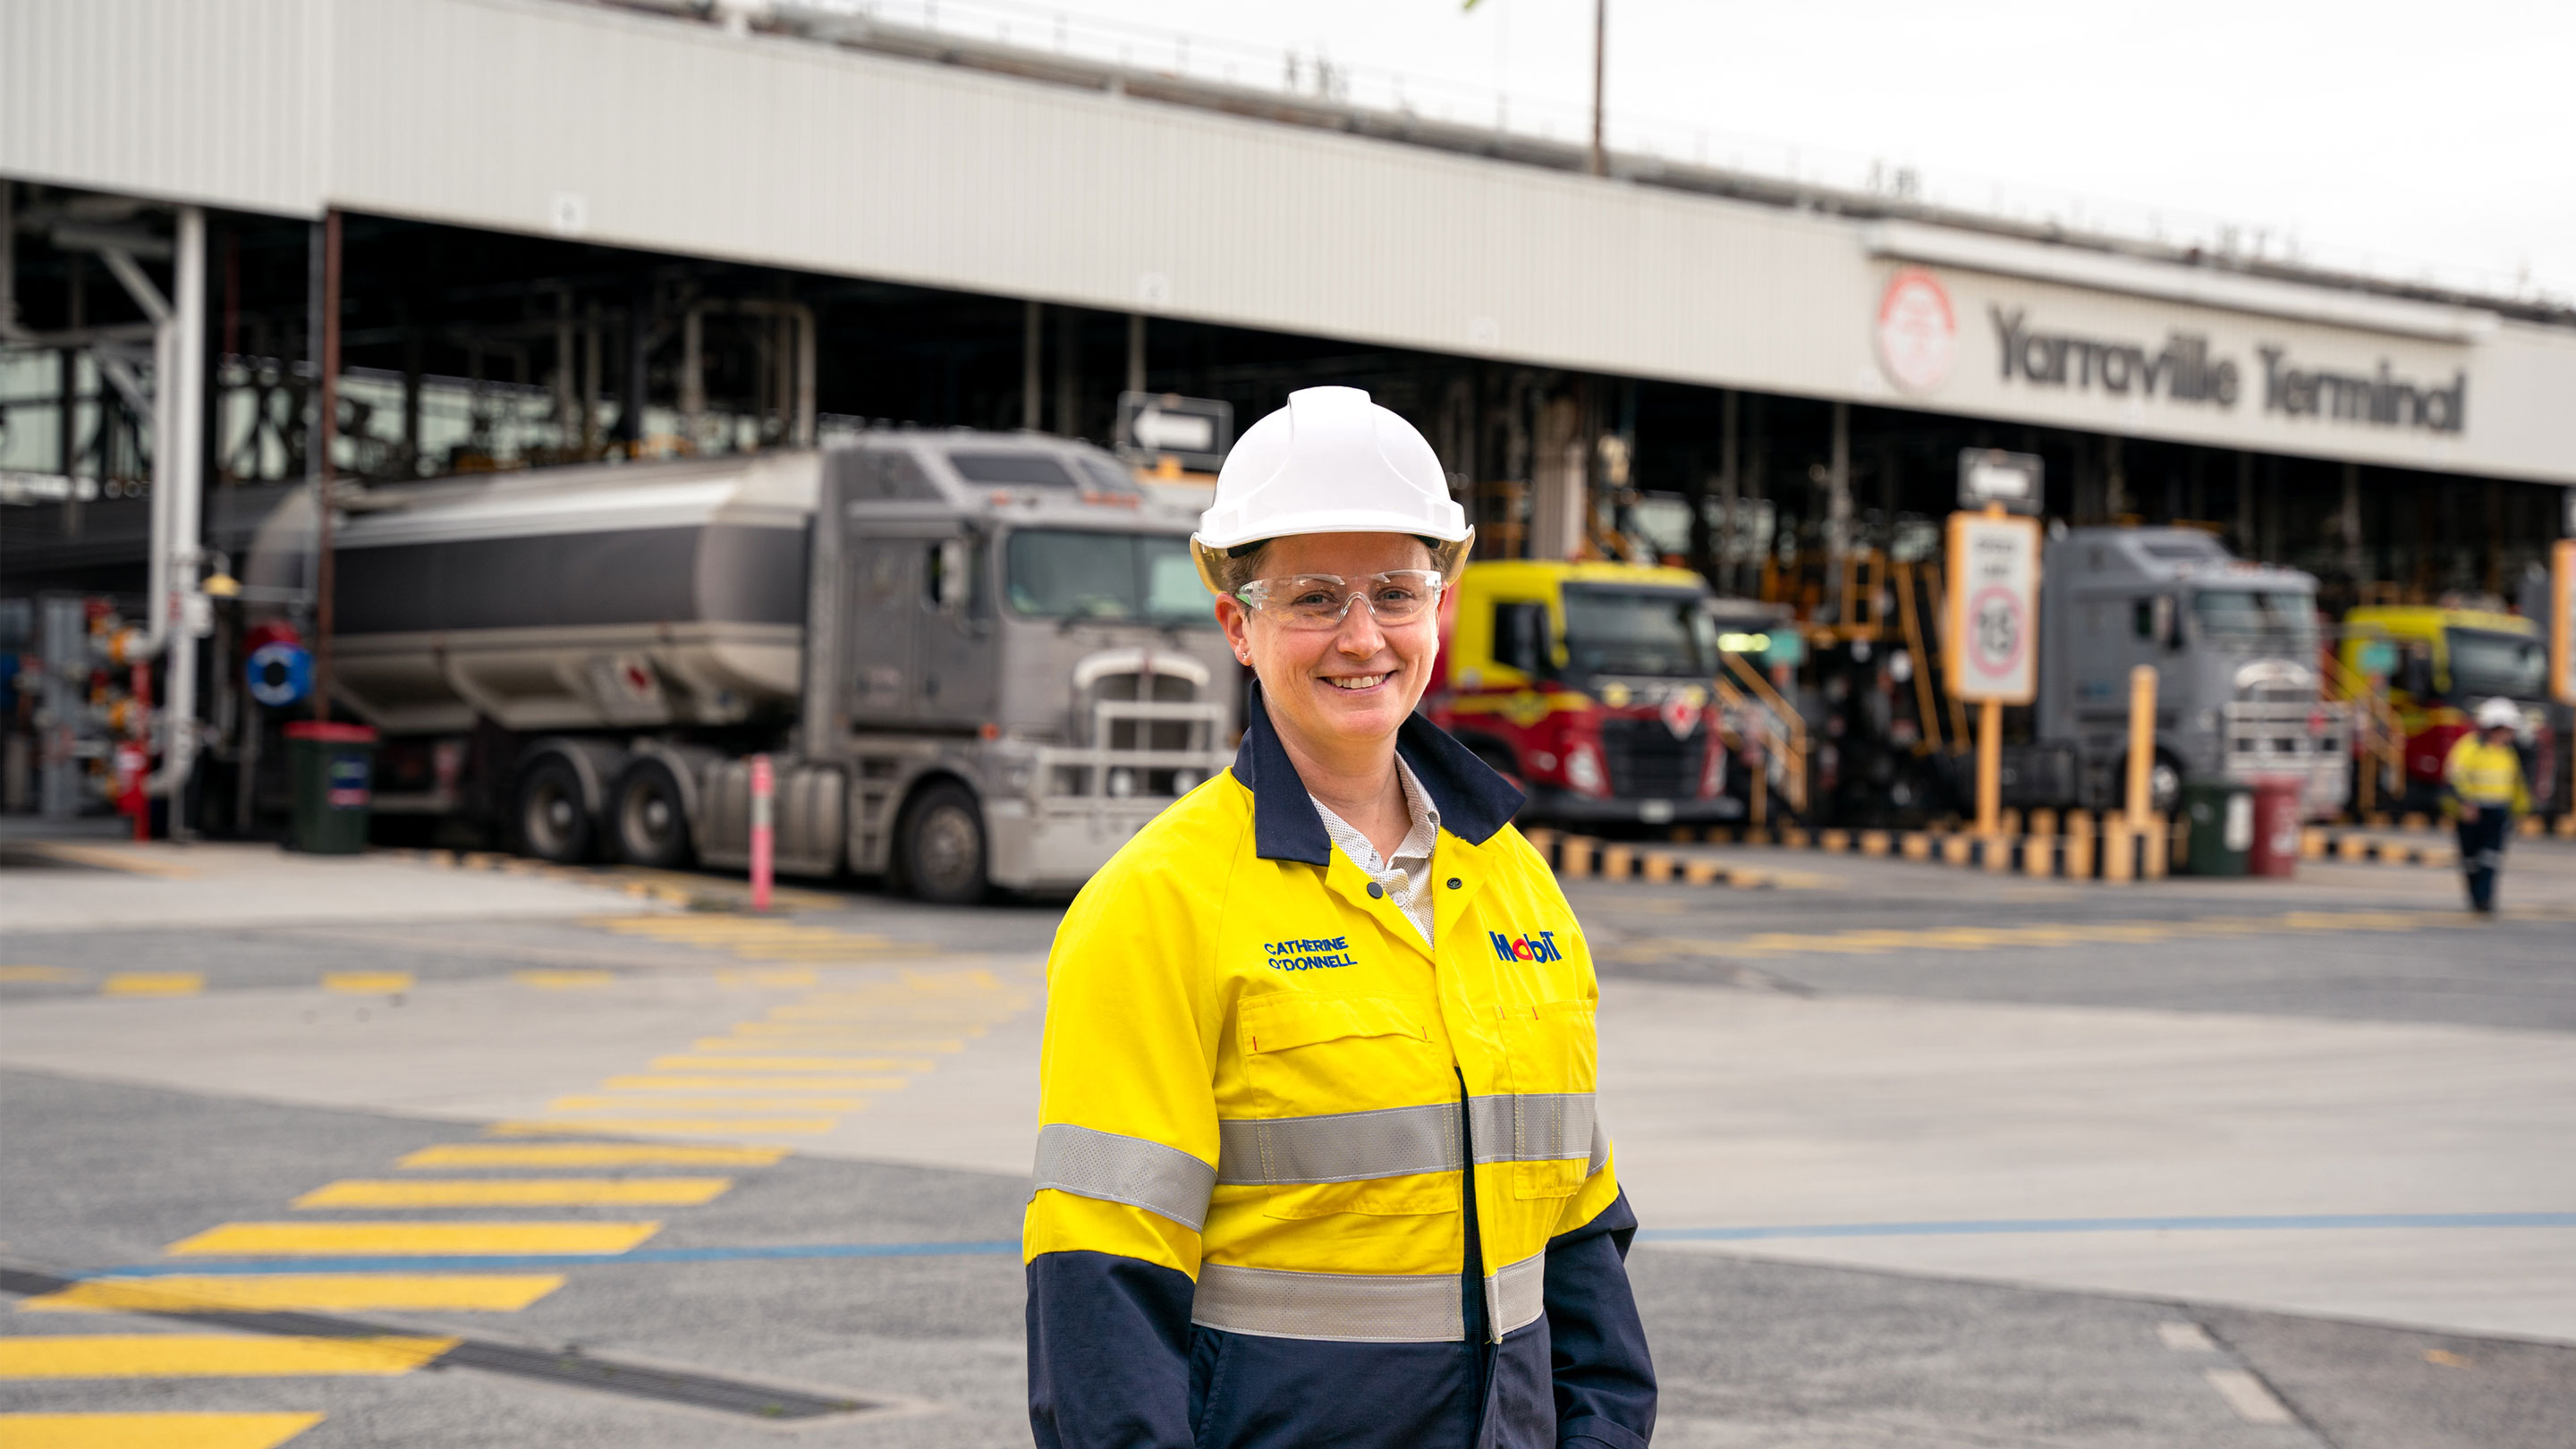 Image Catherine ODonnell is the Australian Fuels Operations Manager at Mobil Oil Australia.